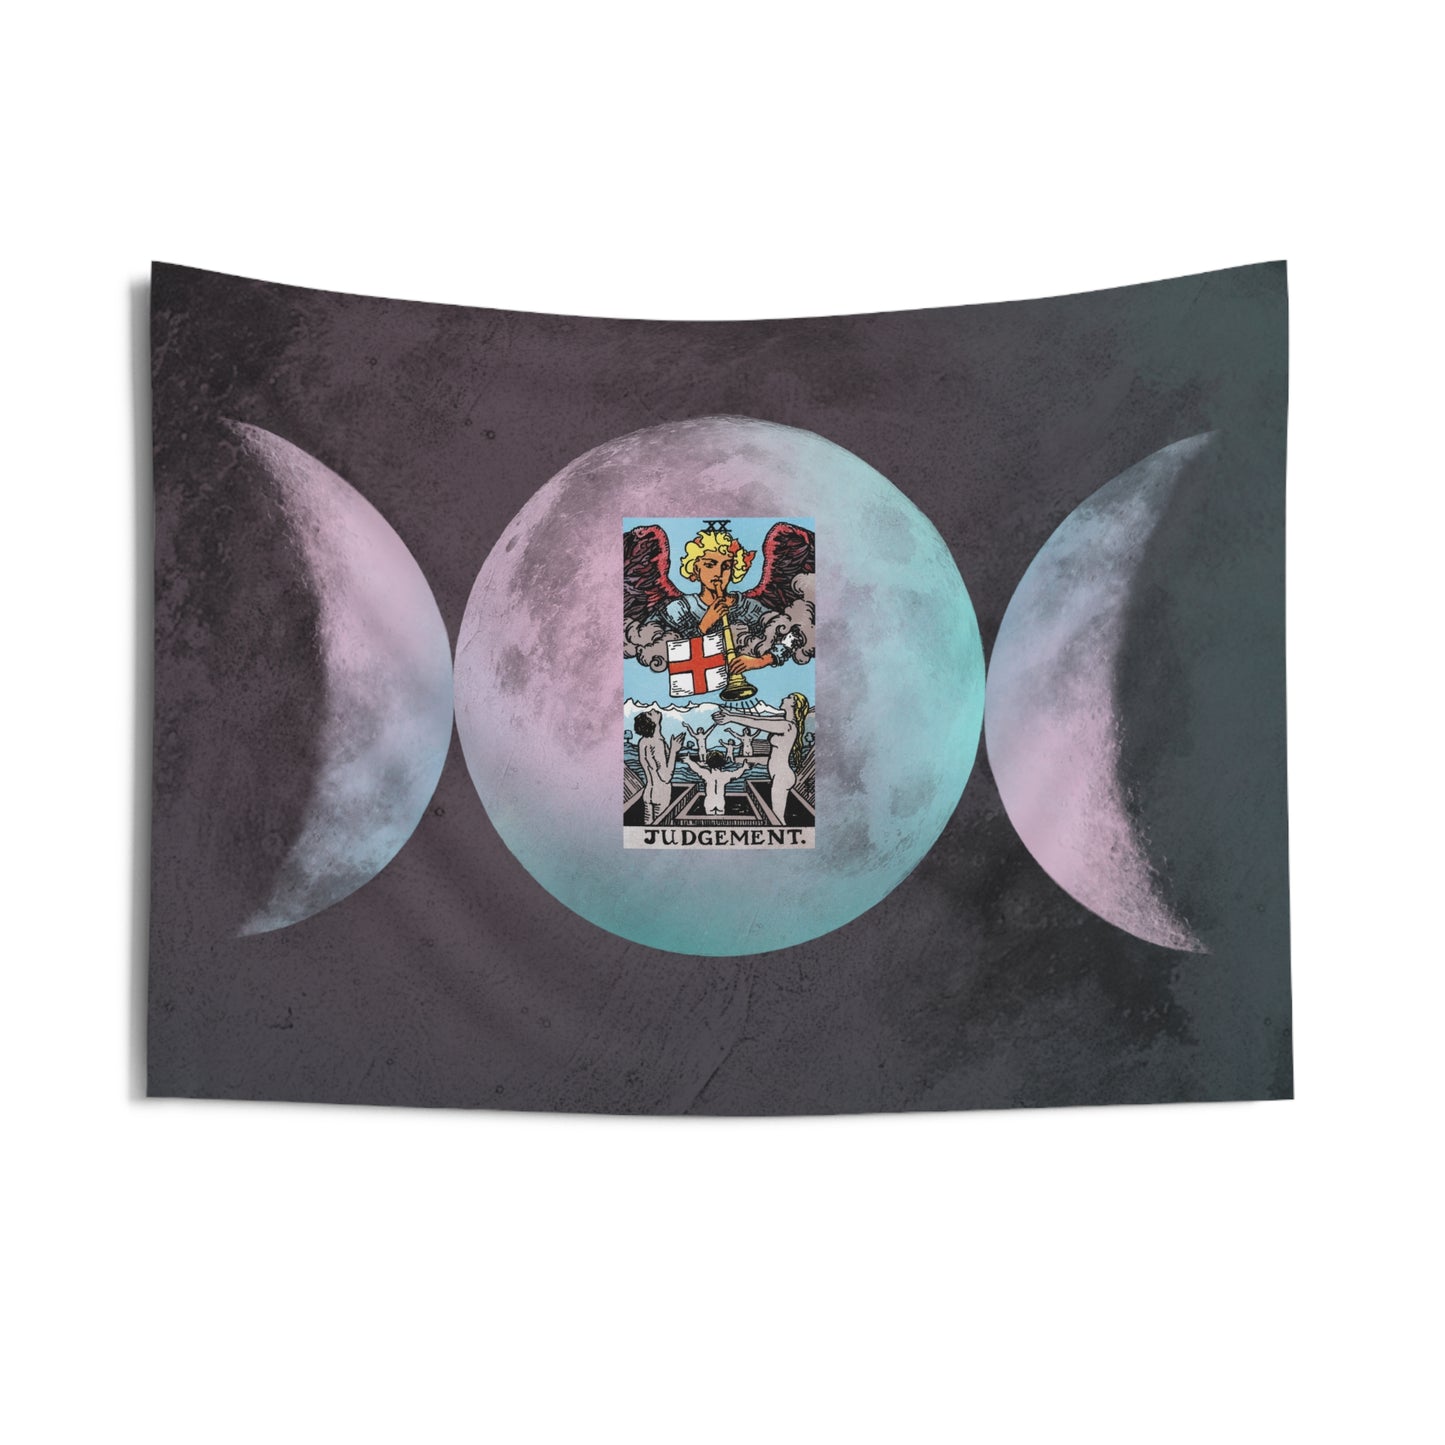 The Judgement Tarot Card Altar Cloth or Tapestry with Triple Goddess Symbol